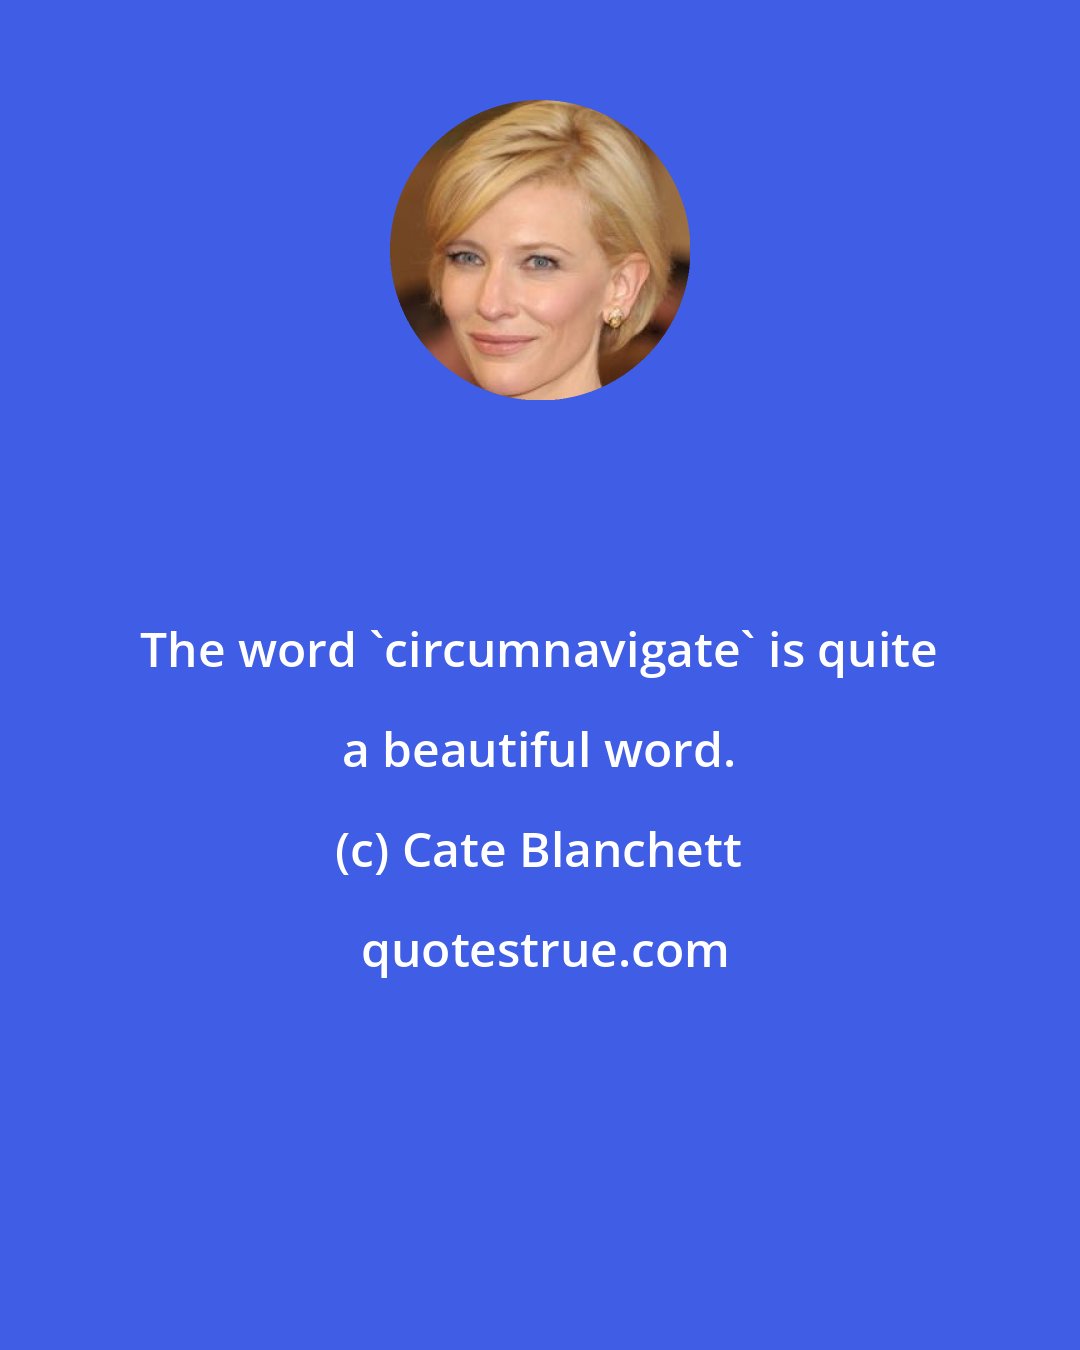 Cate Blanchett: The word 'circumnavigate' is quite a beautiful word.